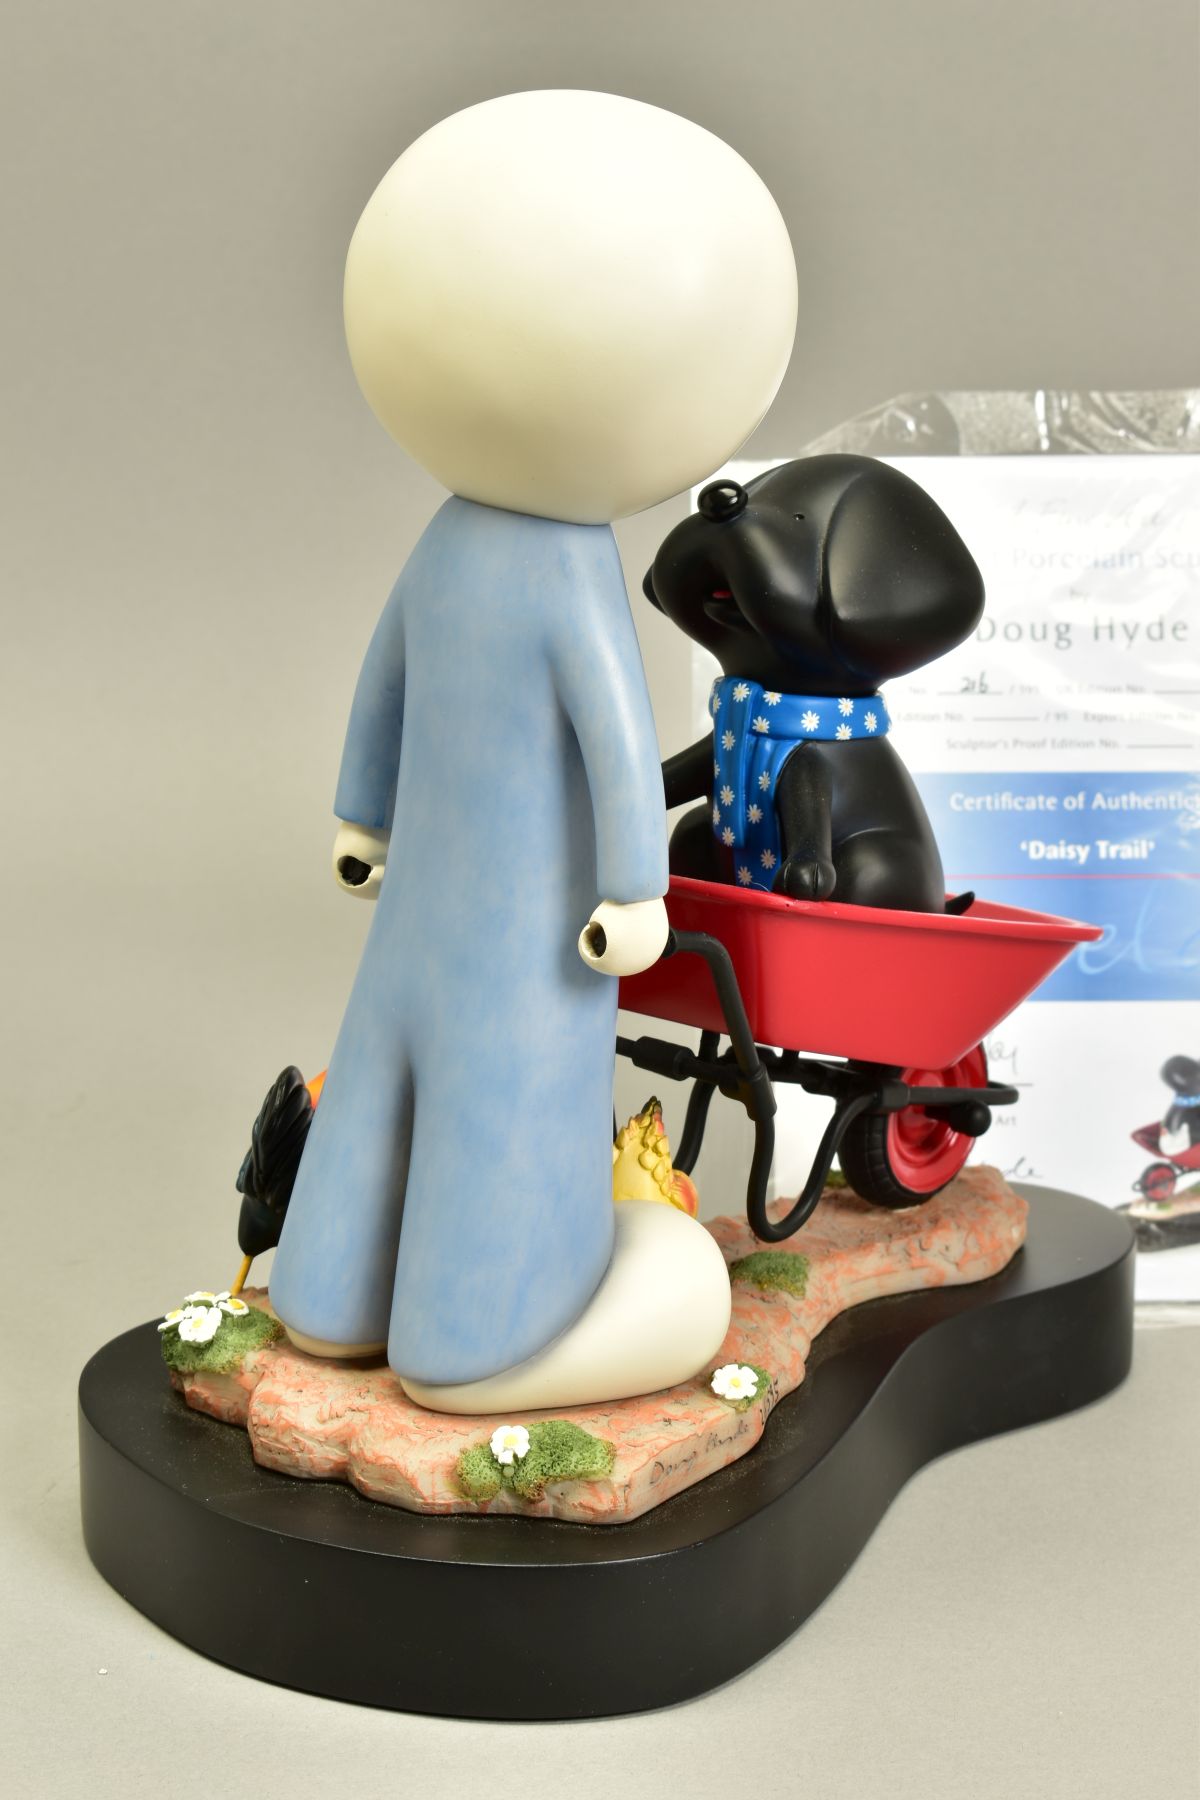 DOUG HYDE (BRITISH 1972) 'DAISY TRAIL', a limited edition cold cast porcelain sculpture of a boy - Image 4 of 5